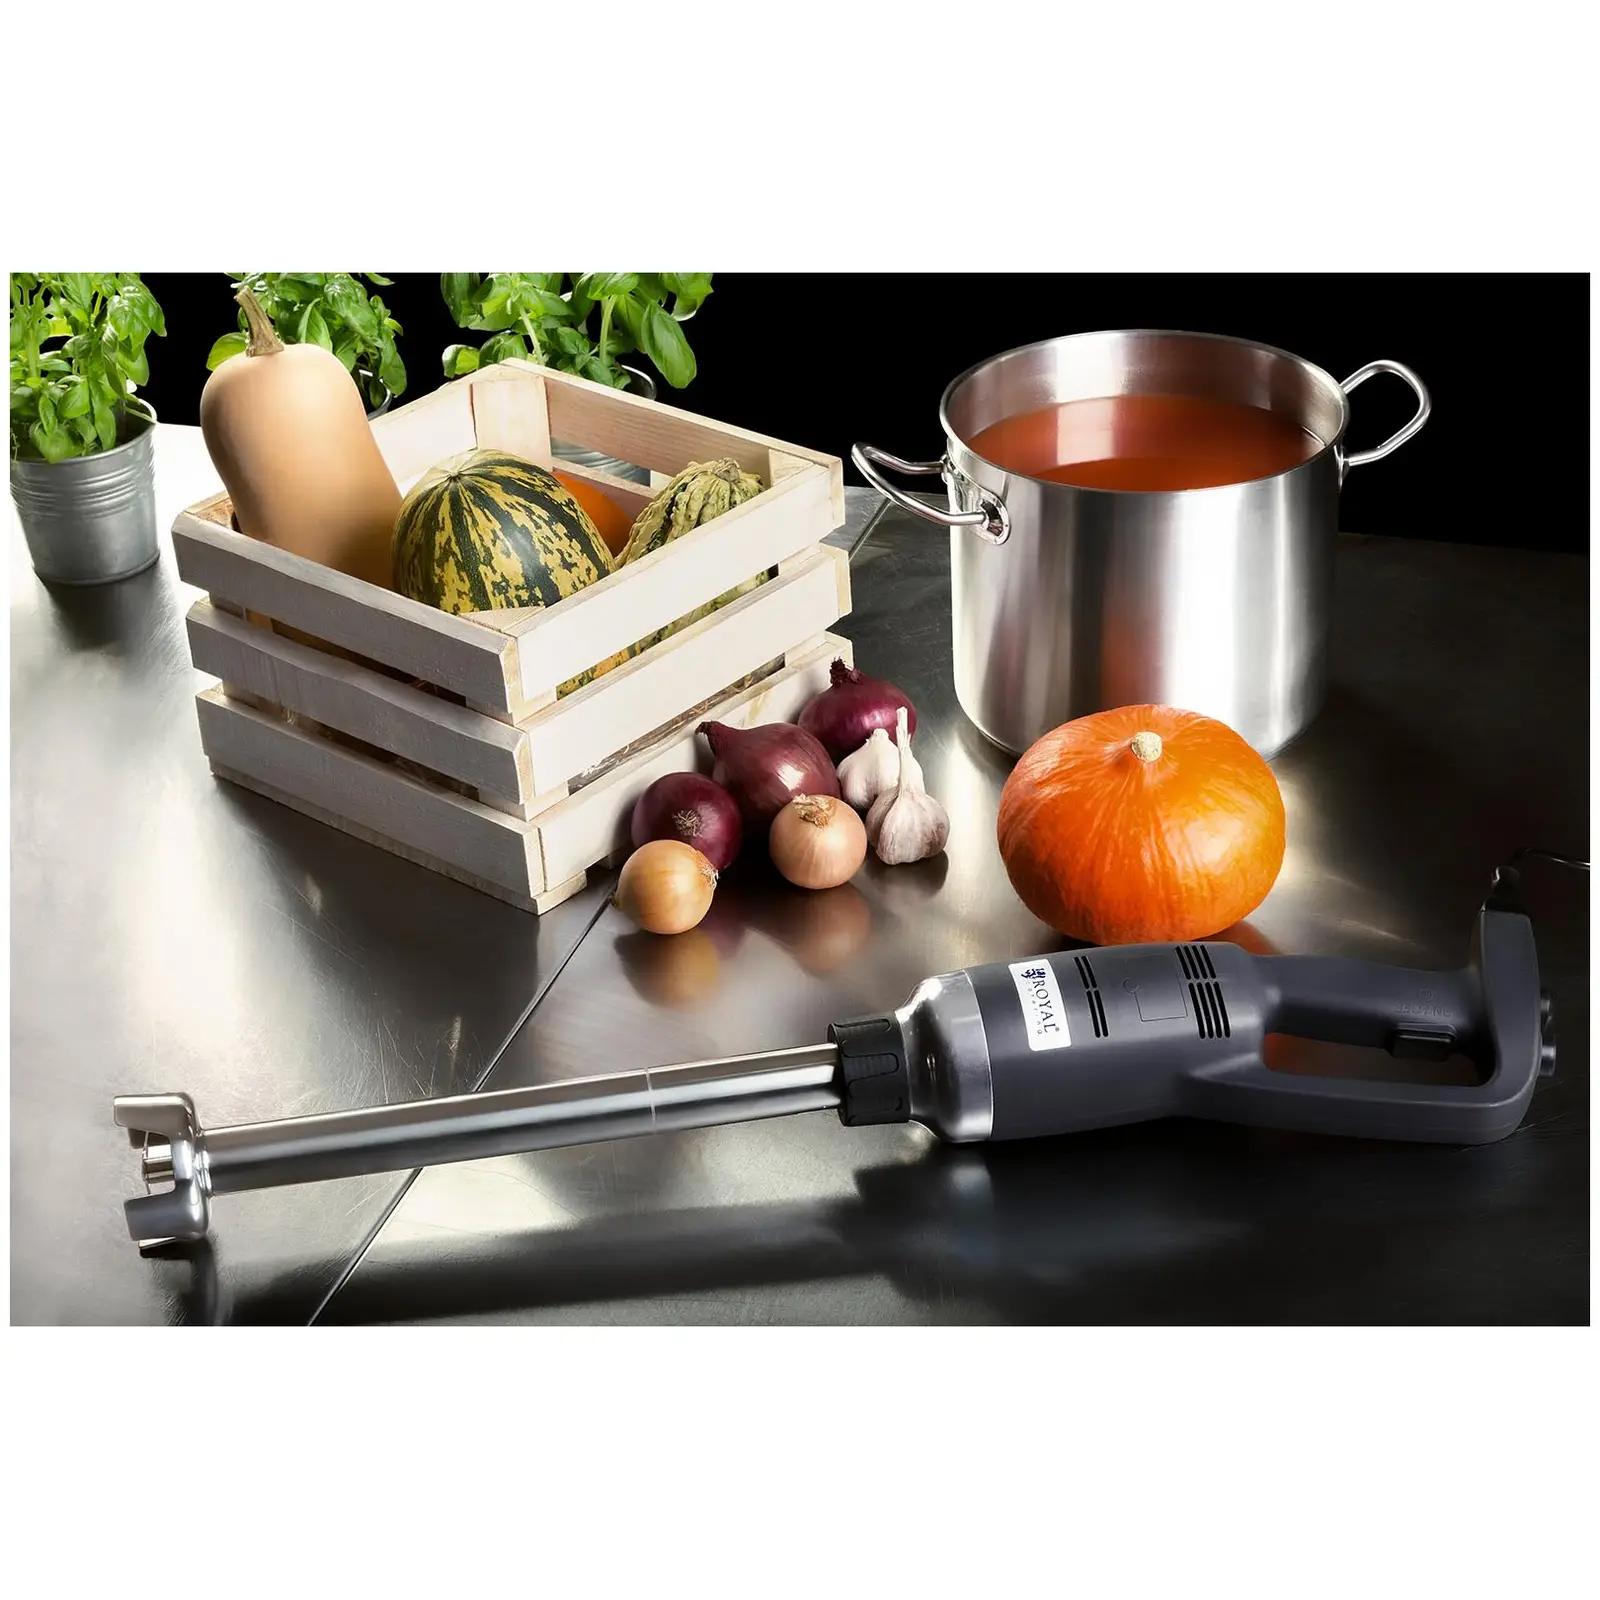 Hand blender - 350 W - 400 mm - 4,000 to 18,000 rpm - 8